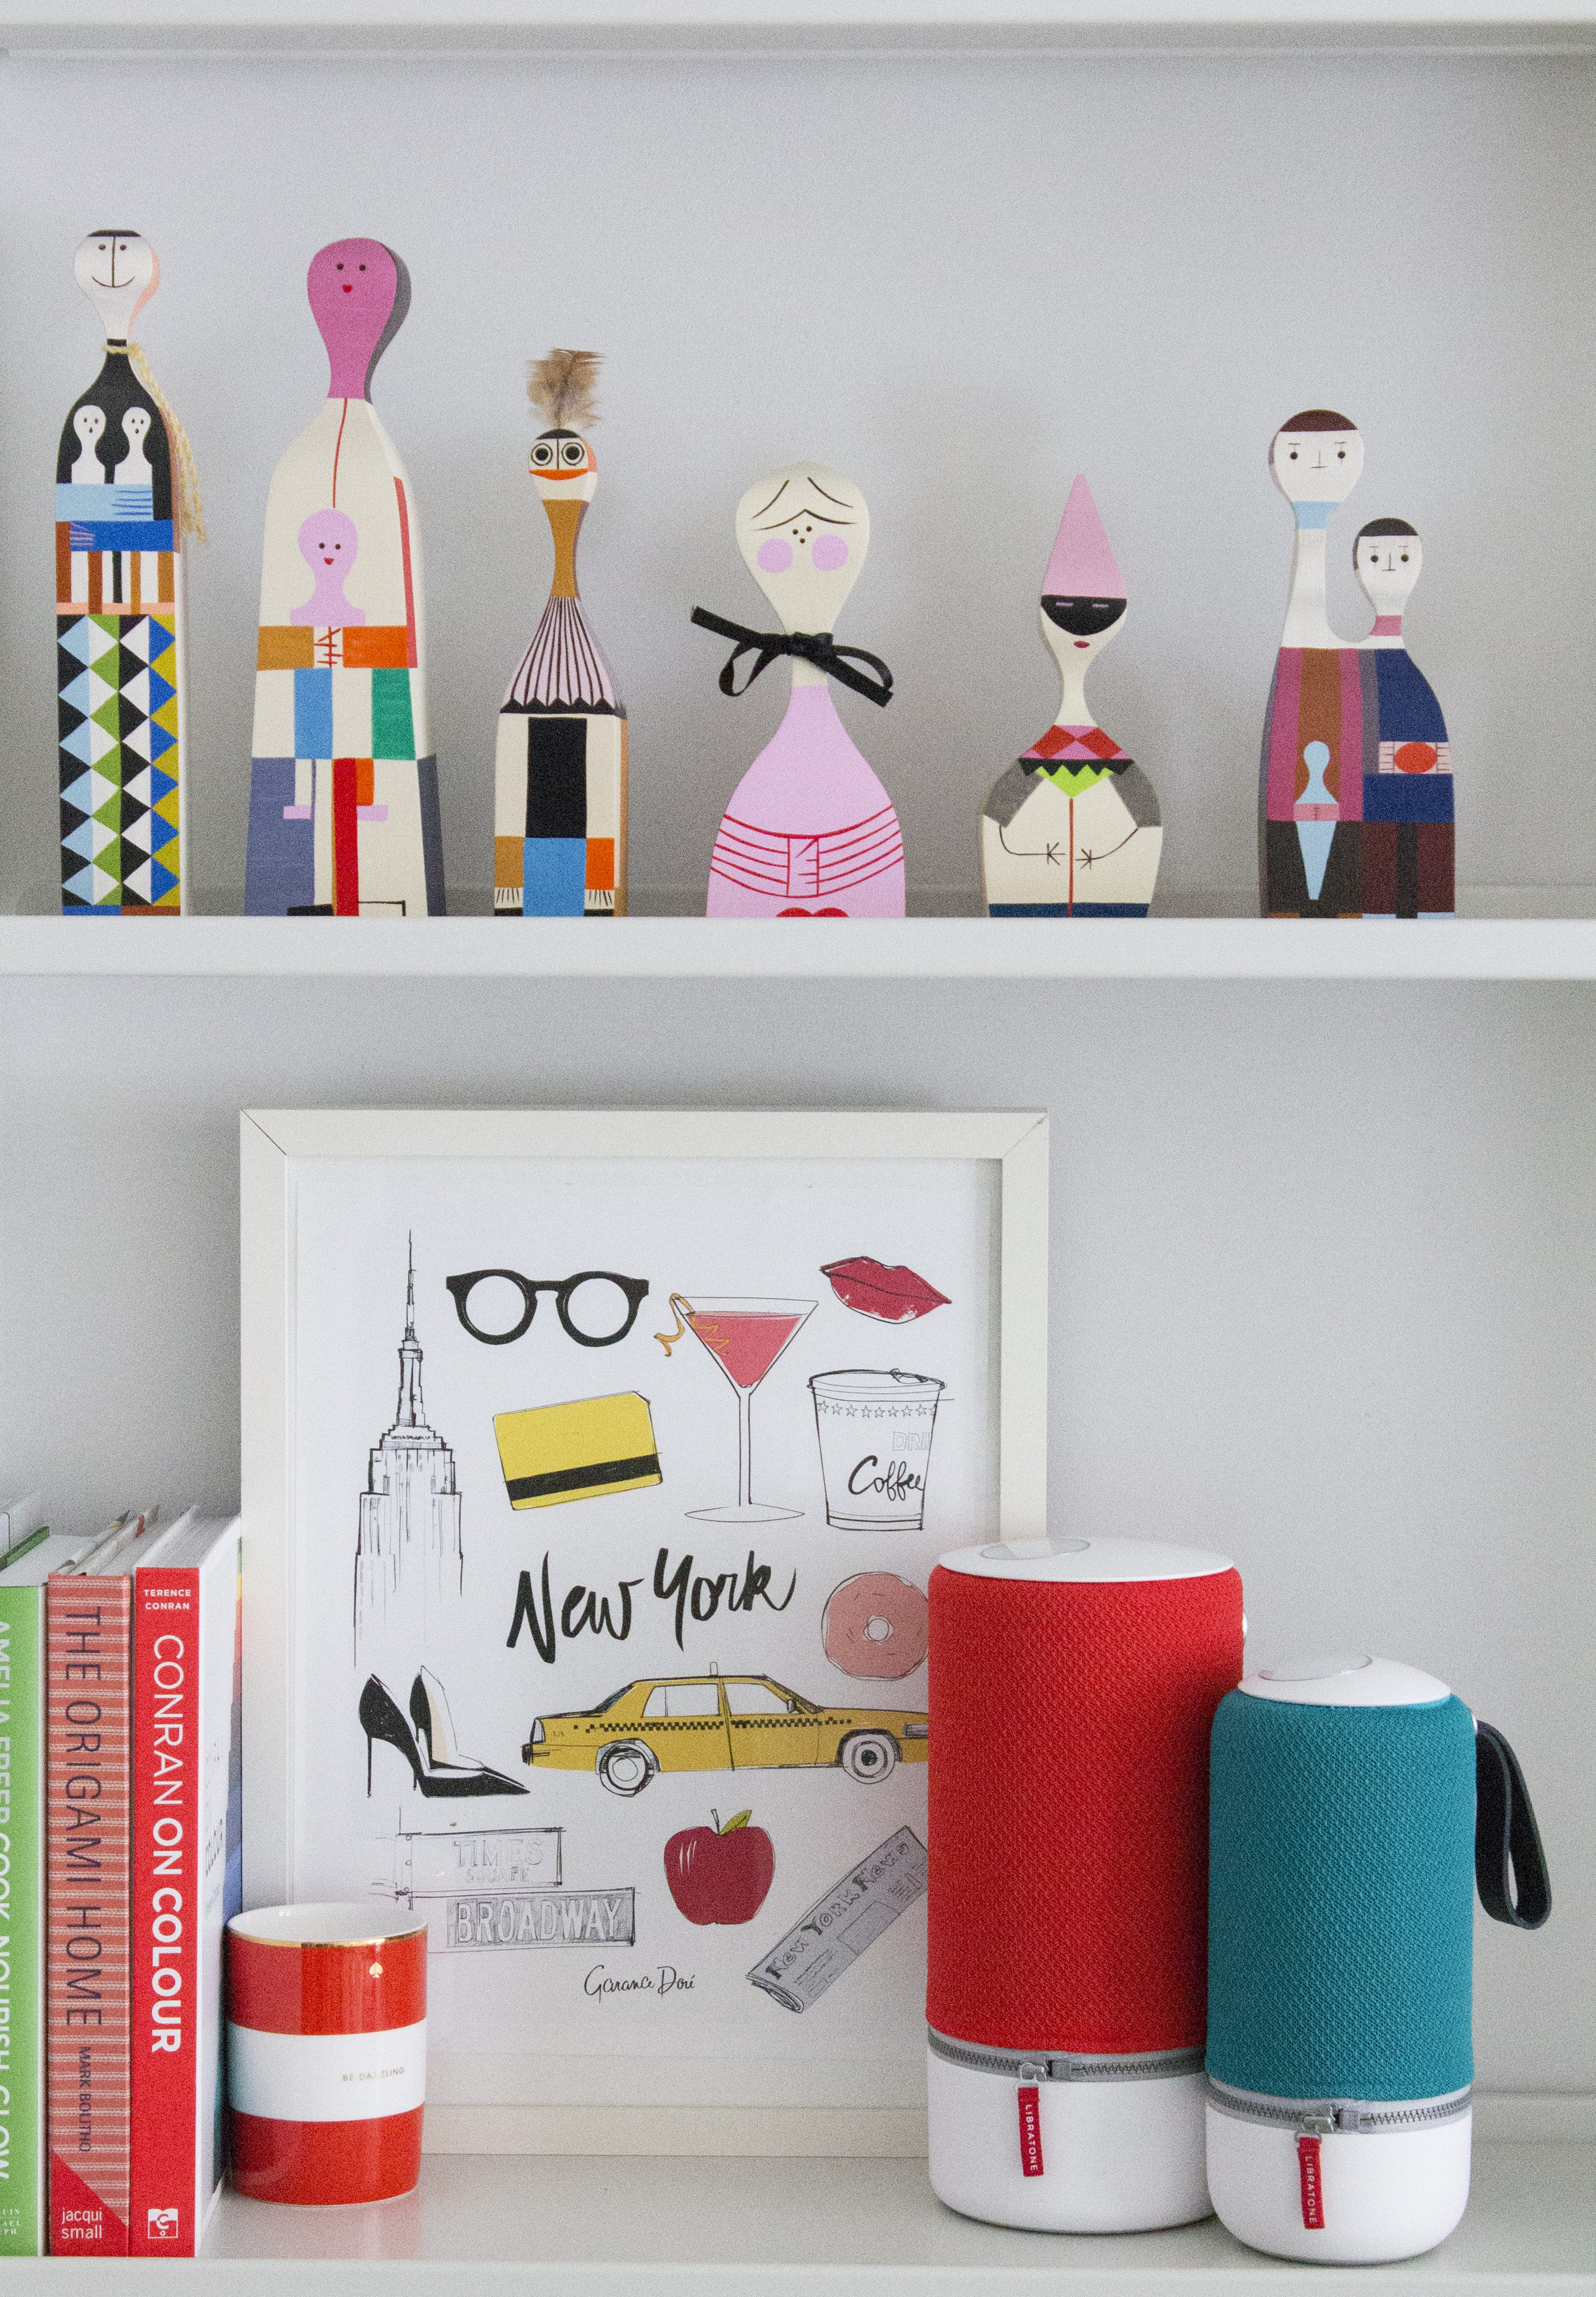 Libratone-on-the-shelf-photo-by-Little-Big-Bell